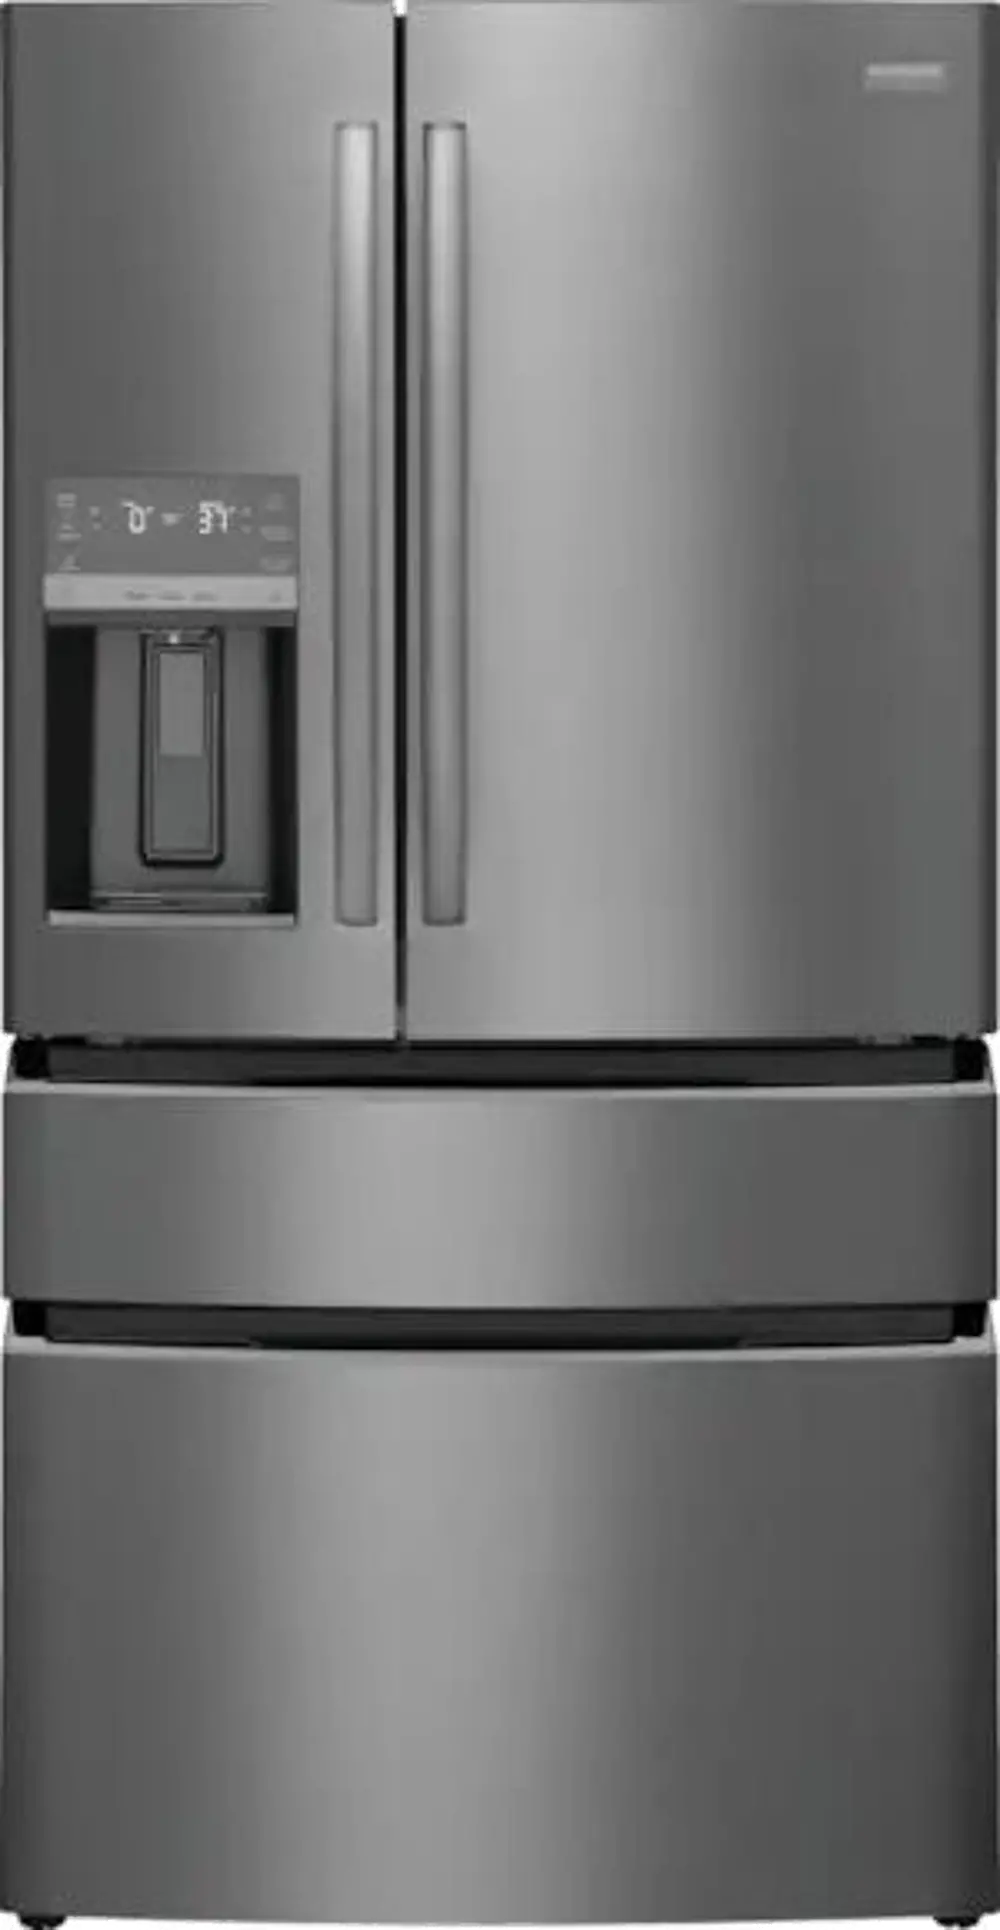 GRMC2273BD Frigidaire 21.5 cu ft French Door Refrigerator - Counter Depth Black Stainless Steel-1